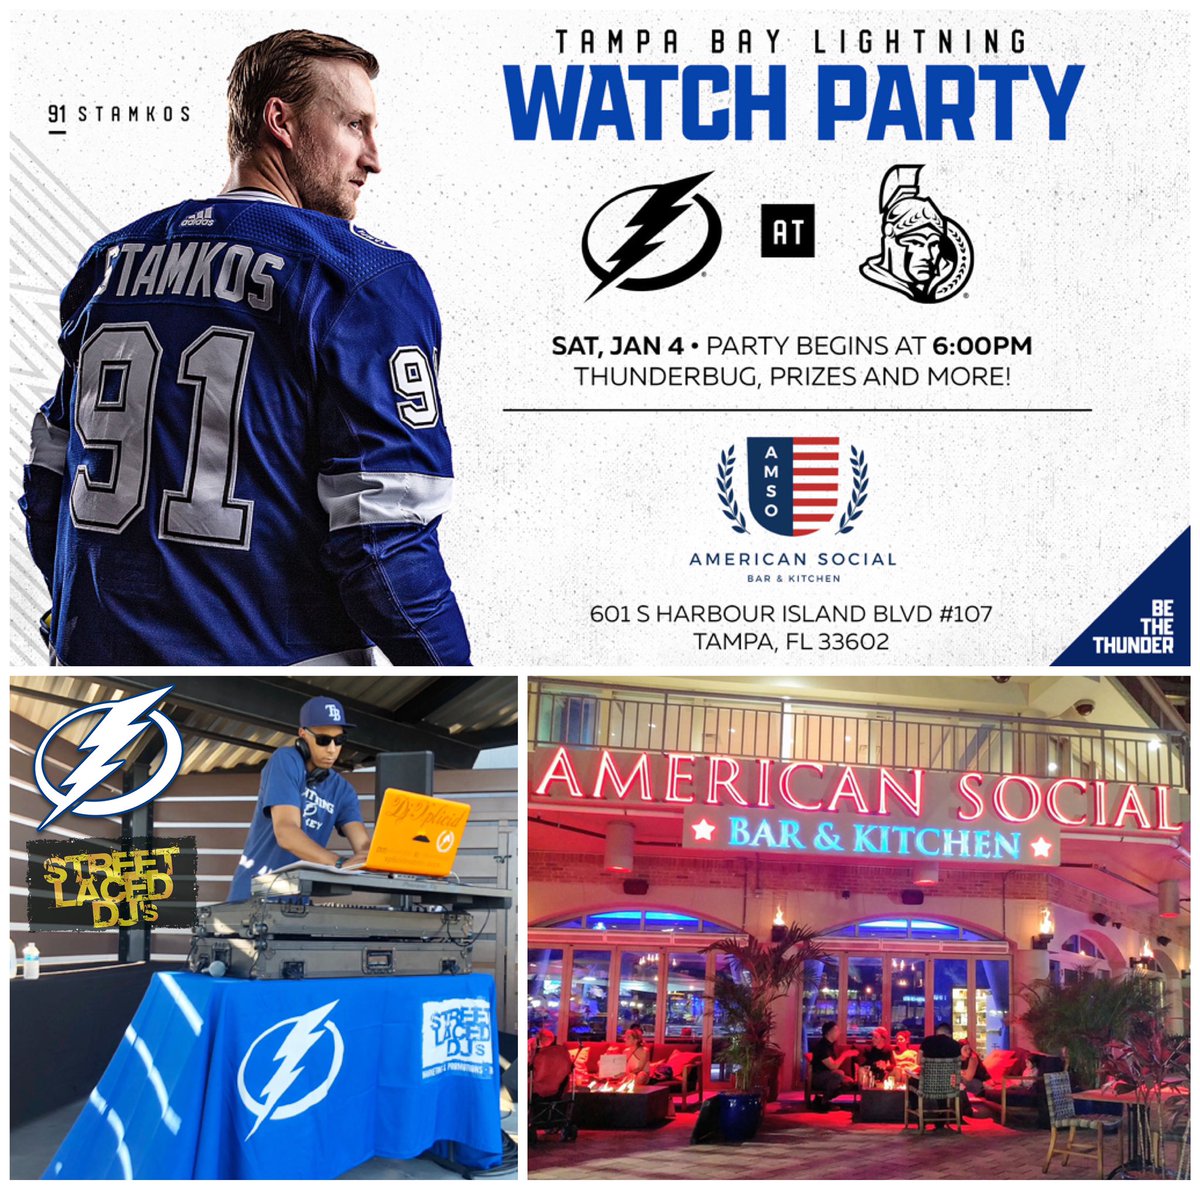 #BoltsNation⚡️

We hope to see YOU at @AmSoTampa for tonight’s OFFICIAL @TBLightning Watch Party! Bolts looking for their 6th straight WIN!

#StreetLacedDJs own @djxplicid on the set along with @ThunderBugTBL, #BoltsBlueCrew, Giveaways & more! 
@Tampasdowntown @NHL @CityofTampa